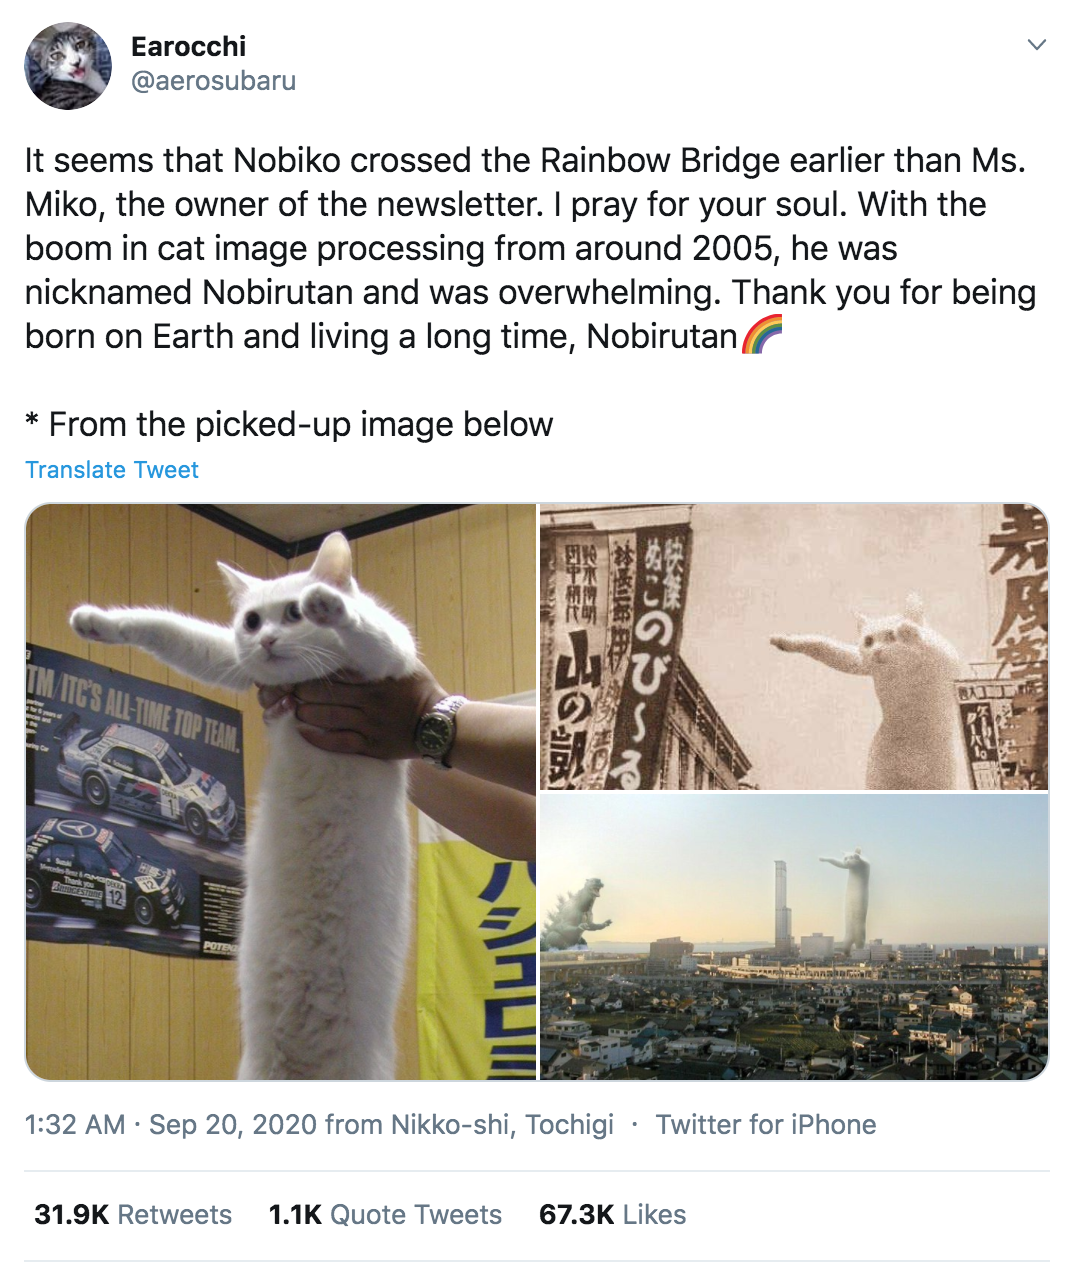 long cat - Earocchi It seems that Nobiko crossed the Rainbow Bridge earlier than Ms. Miko, the owner of the newsletter. I pray for your soul. With the boom in cat image processing from around 2005, he was nicknamed Nobirutan and was overwhelming. Thank yo